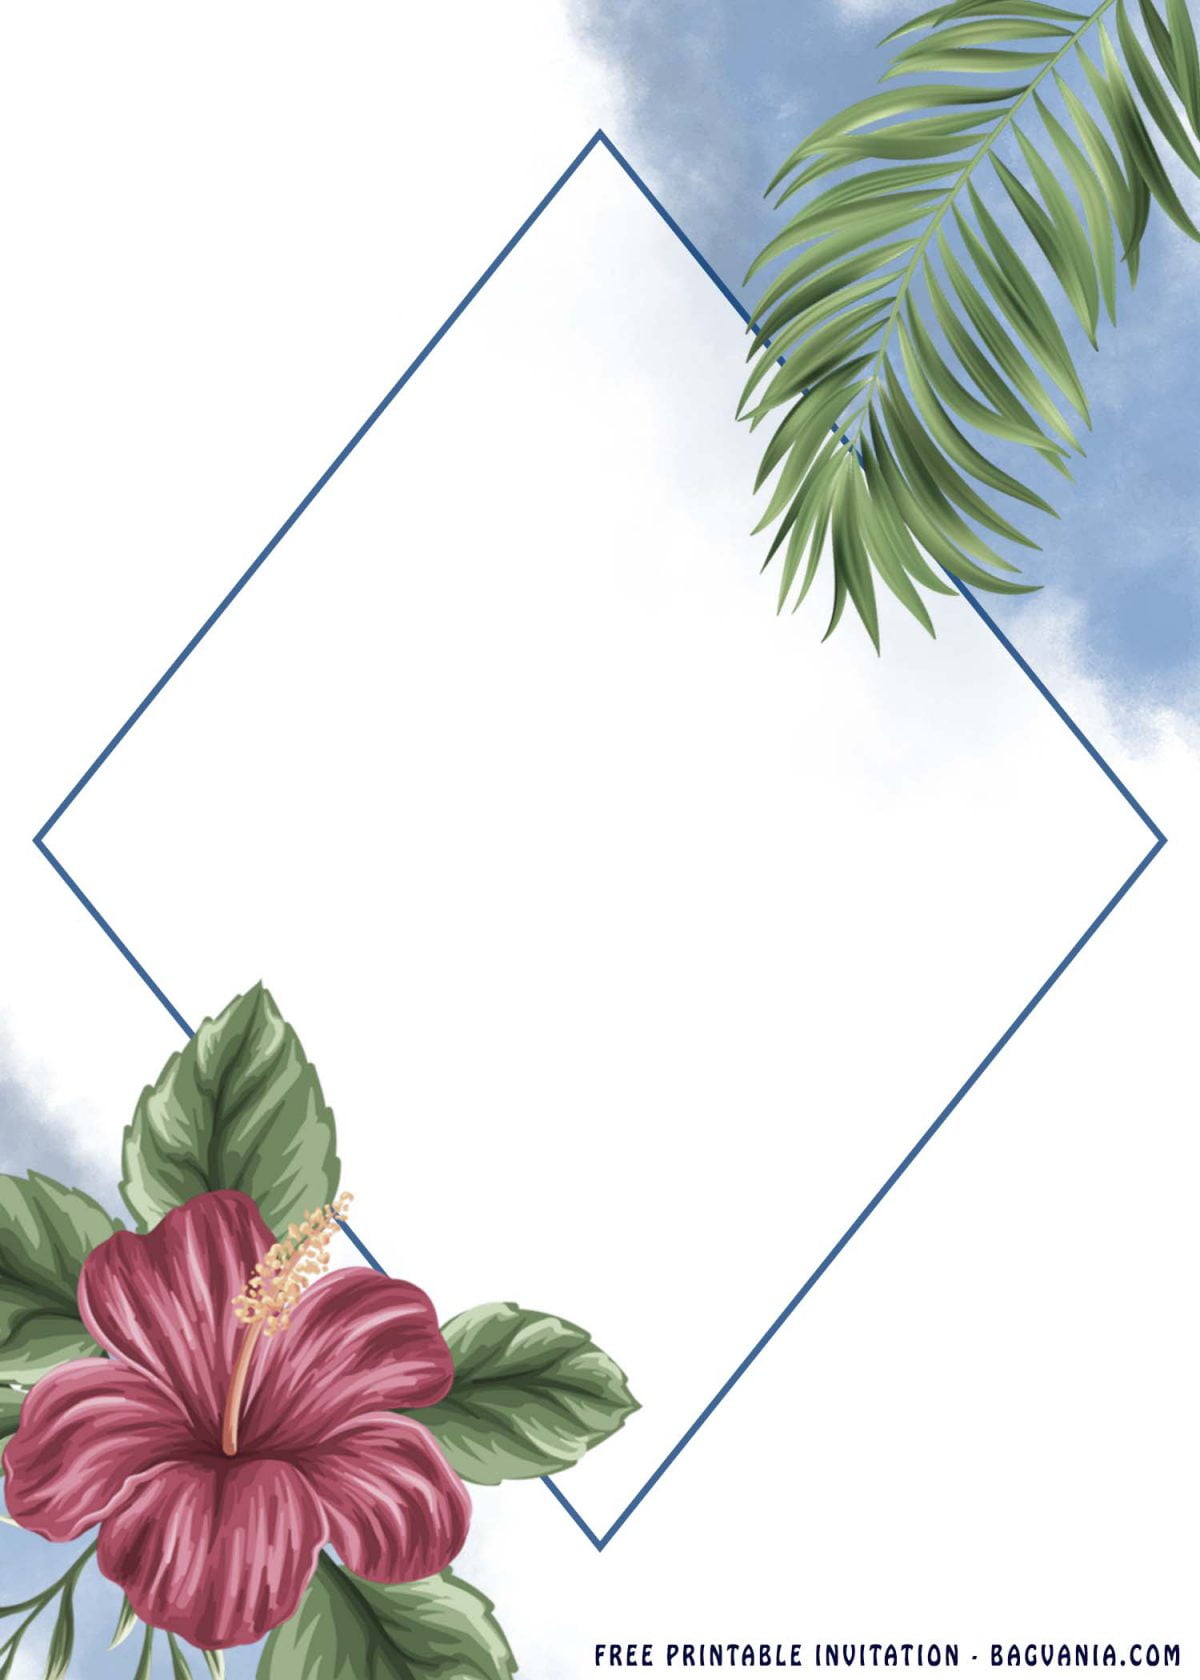 Free Printable Blue Frames Invitation Templates With Tropical Leaves